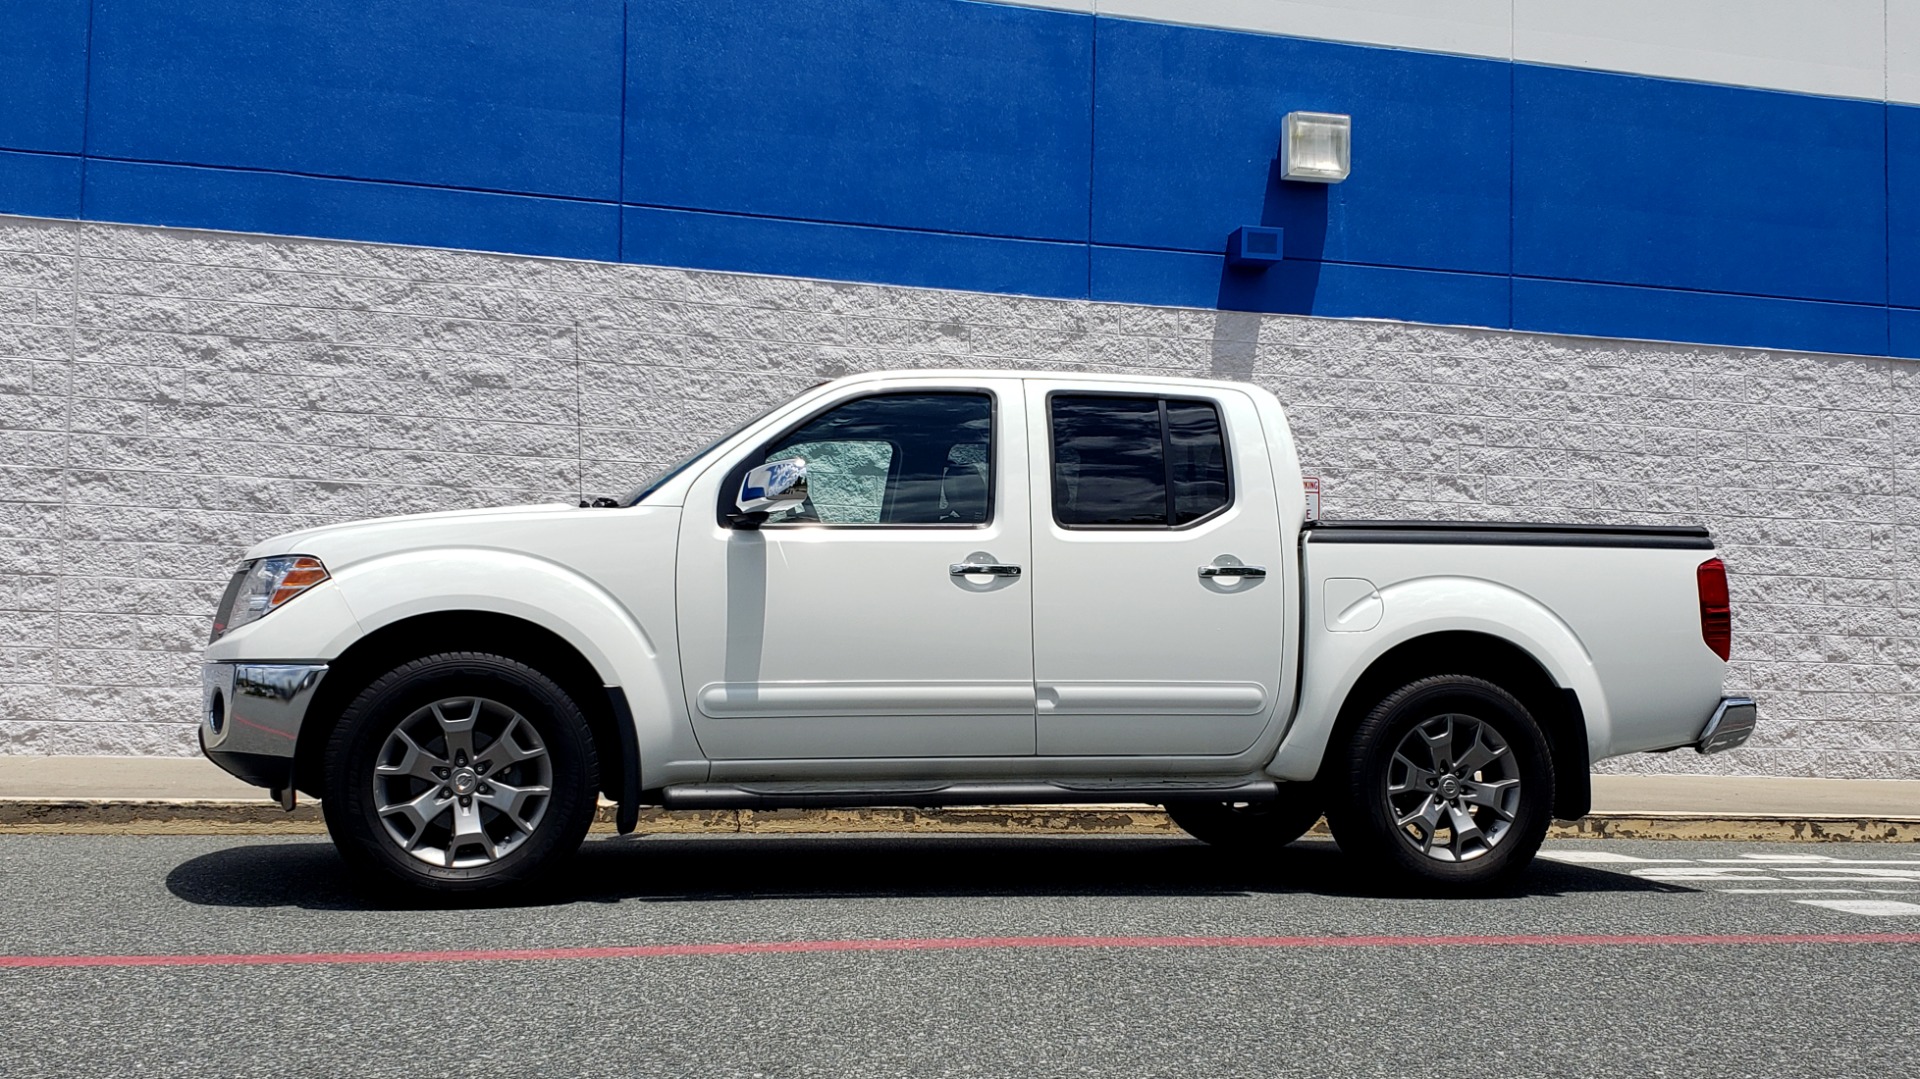 Used 2019 Nissan FRONTIER SL CREW CAB / 4X4 / NAV / SUNROOF / ROCKFORD FOSGATE / LOADED for sale Sold at Formula Imports in Charlotte NC 28227 6